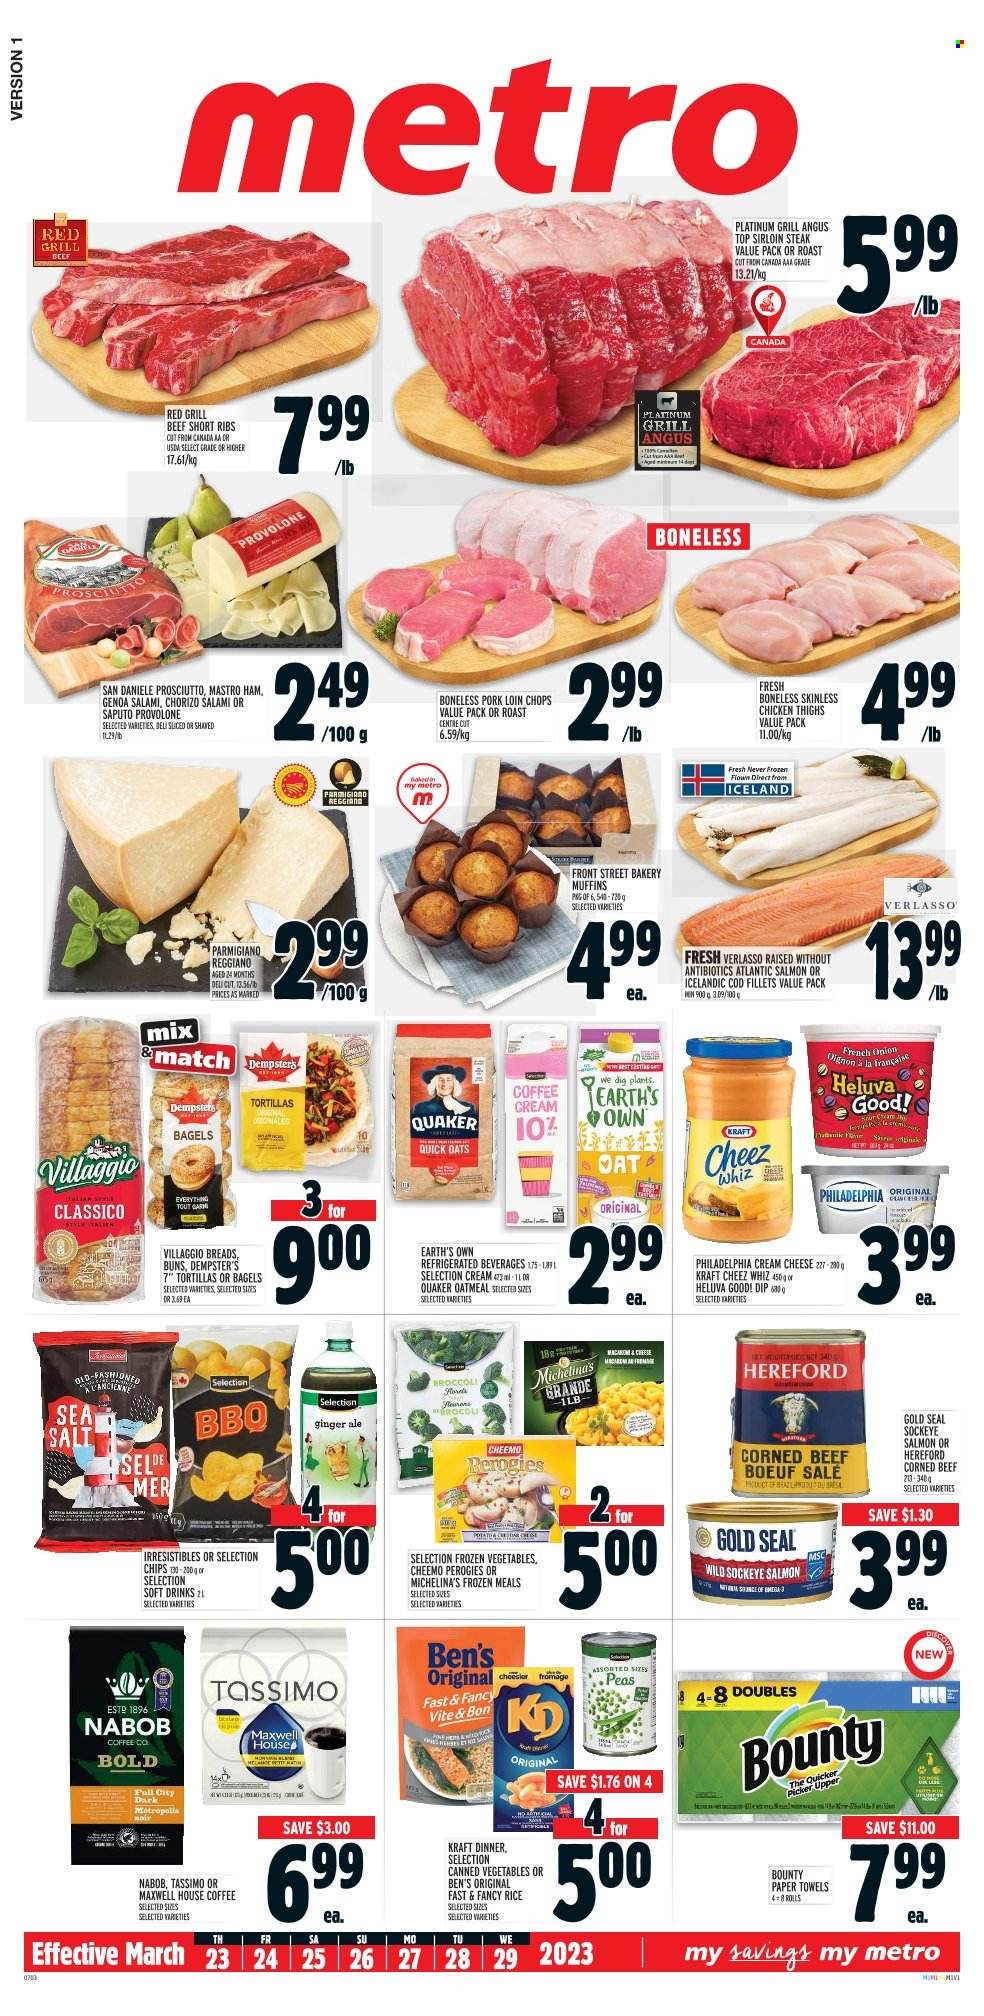 thumbnail - Metro Flyer - March 23, 2023 - March 29, 2023 - Sales products - bagels, tortillas, buns, muffin, peas, onion, cod, salmon, Quaker, Kraft®, roast, salami, ham, prosciutto, chorizo, corned beef, Parmigiano Reggiano, Provolone, dip, frozen vegetables, Bounty, oatmeal, oats, canned vegetables, Quick Oats, rice, Classico, ginger ale, soft drink, Maxwell House, chicken thighs, chicken, beef meat, beef ribs, beef sirloin, steak, sirloin steak, ribs, pork chops, pork loin, pork meat, kitchen towels, paper towels, grill, Philadelphia. Page 1.